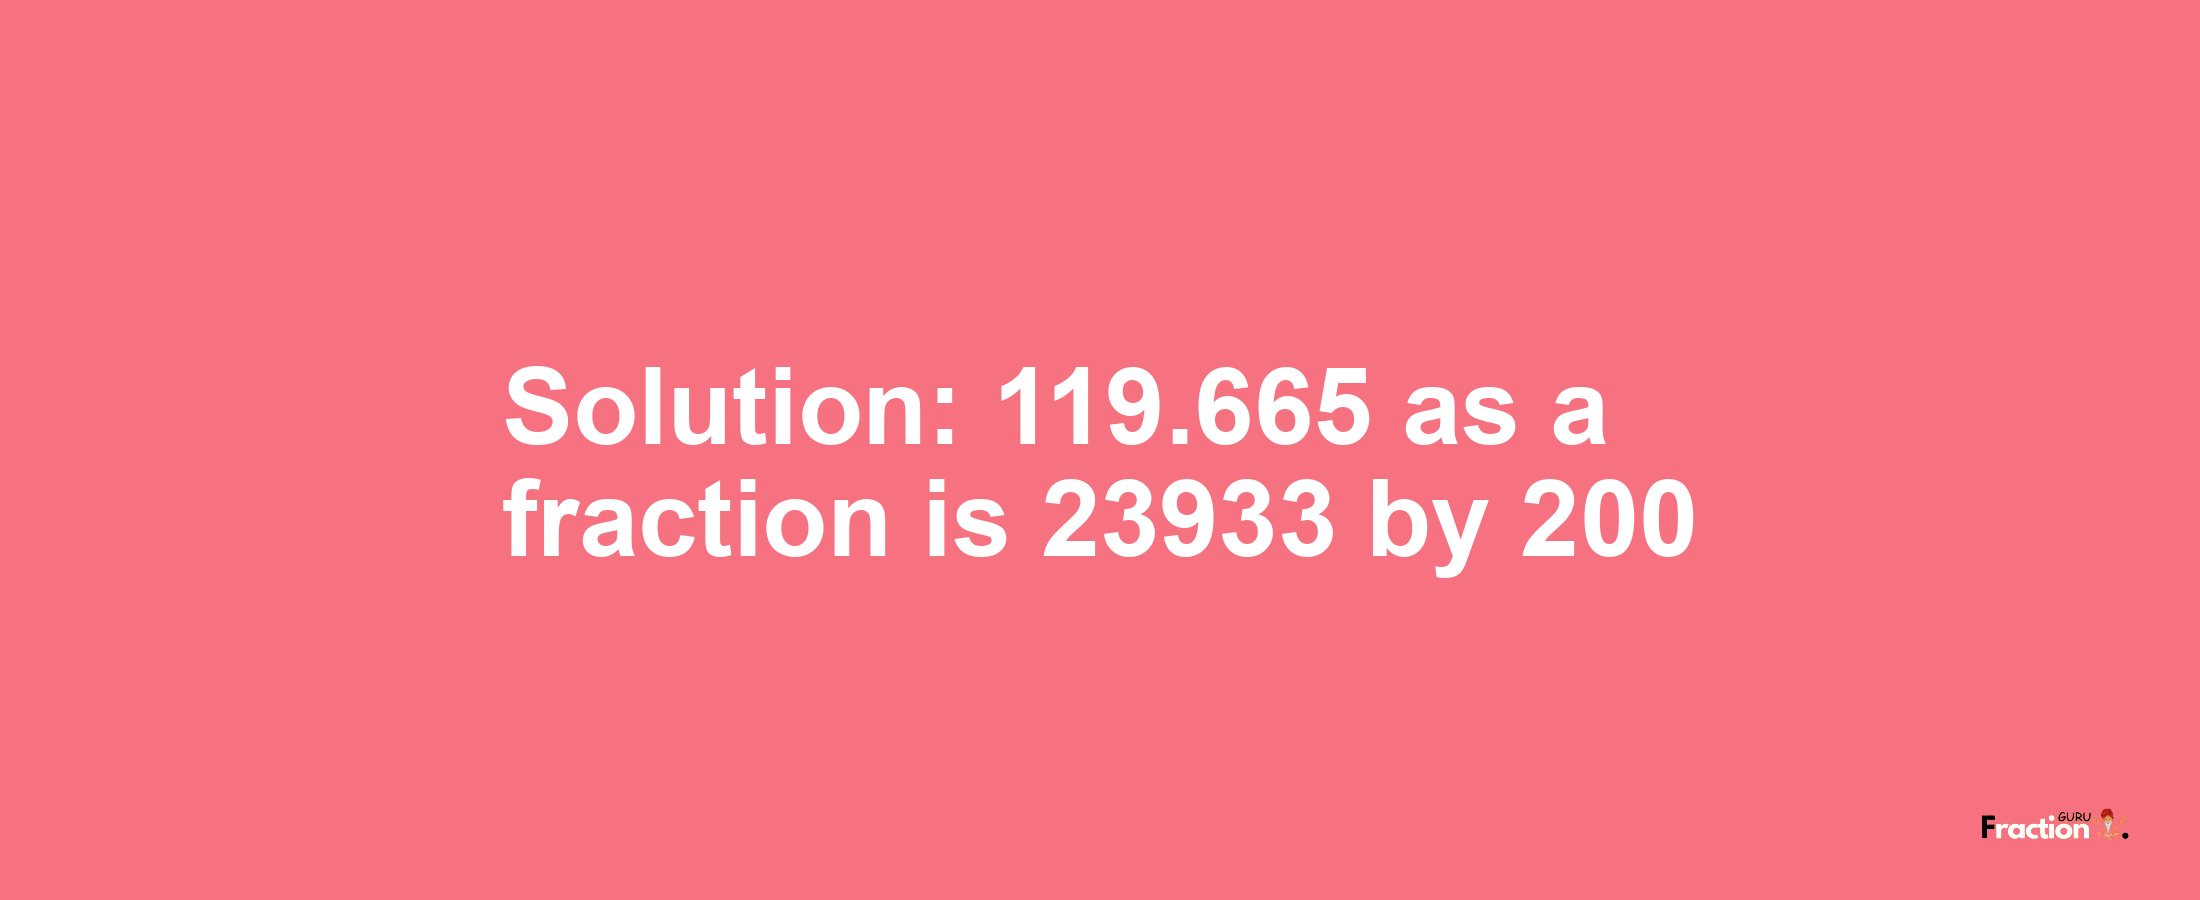 Solution:119.665 as a fraction is 23933/200